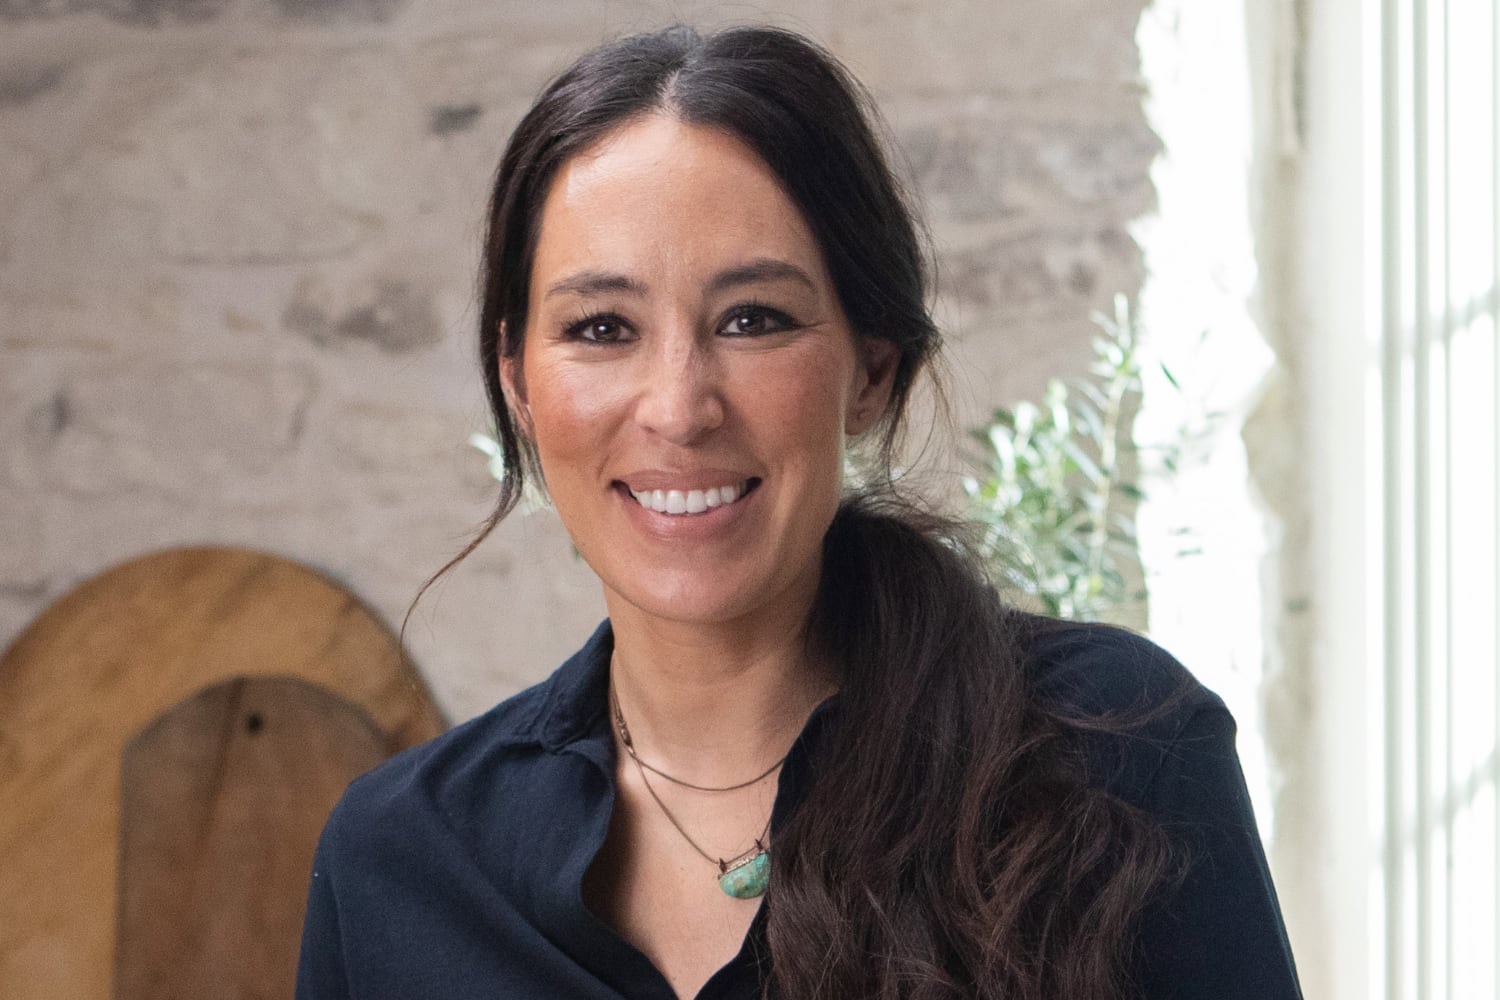 Joanna Gaines: The Avocado Toast From Magnolia Table That Fans Are ...